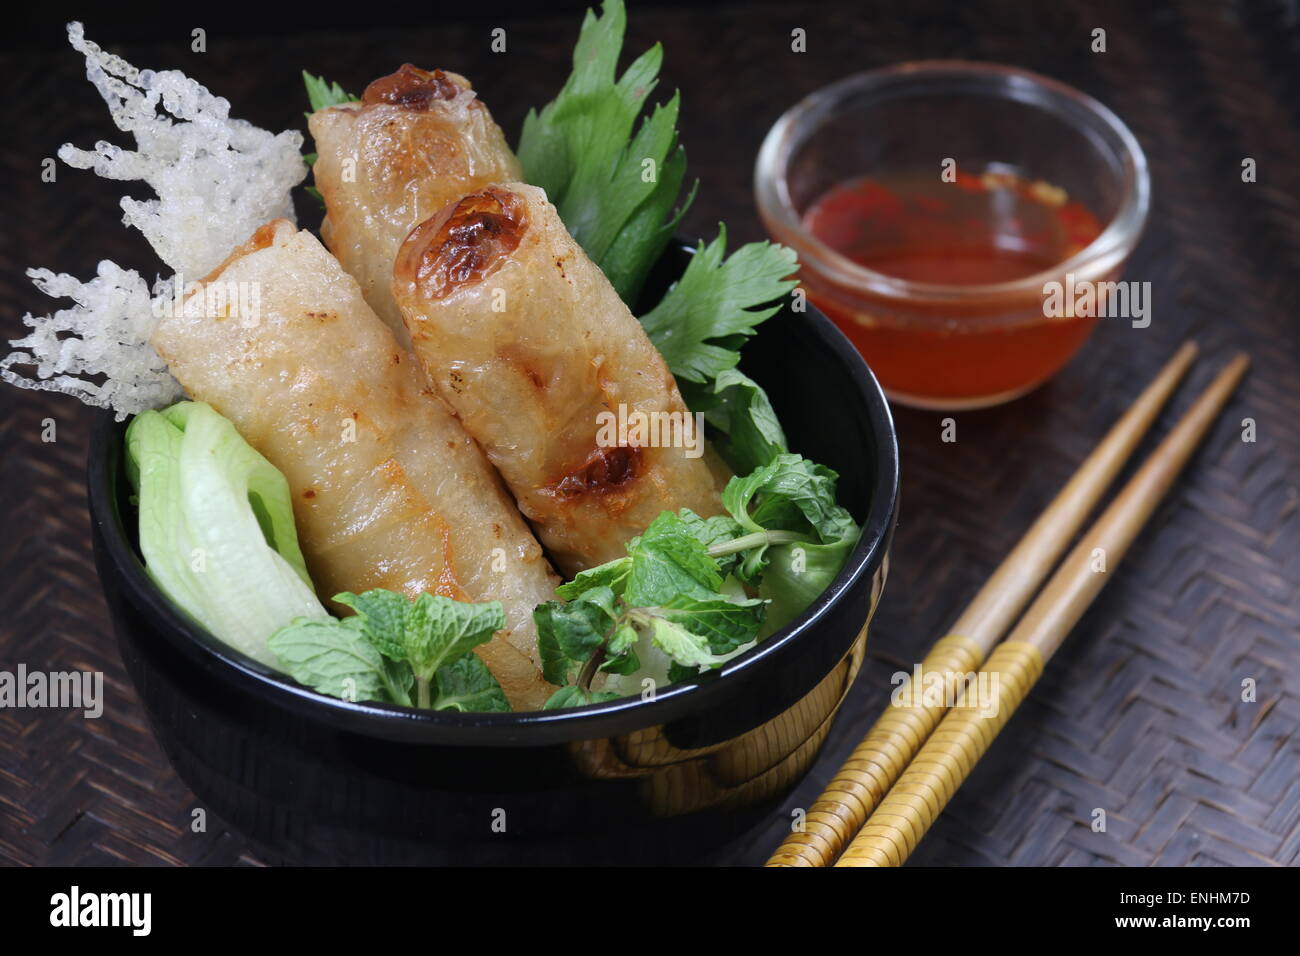 Cha Gio, Vietnamese fried spring rolls, served with chili dipping sauce Stock Photo